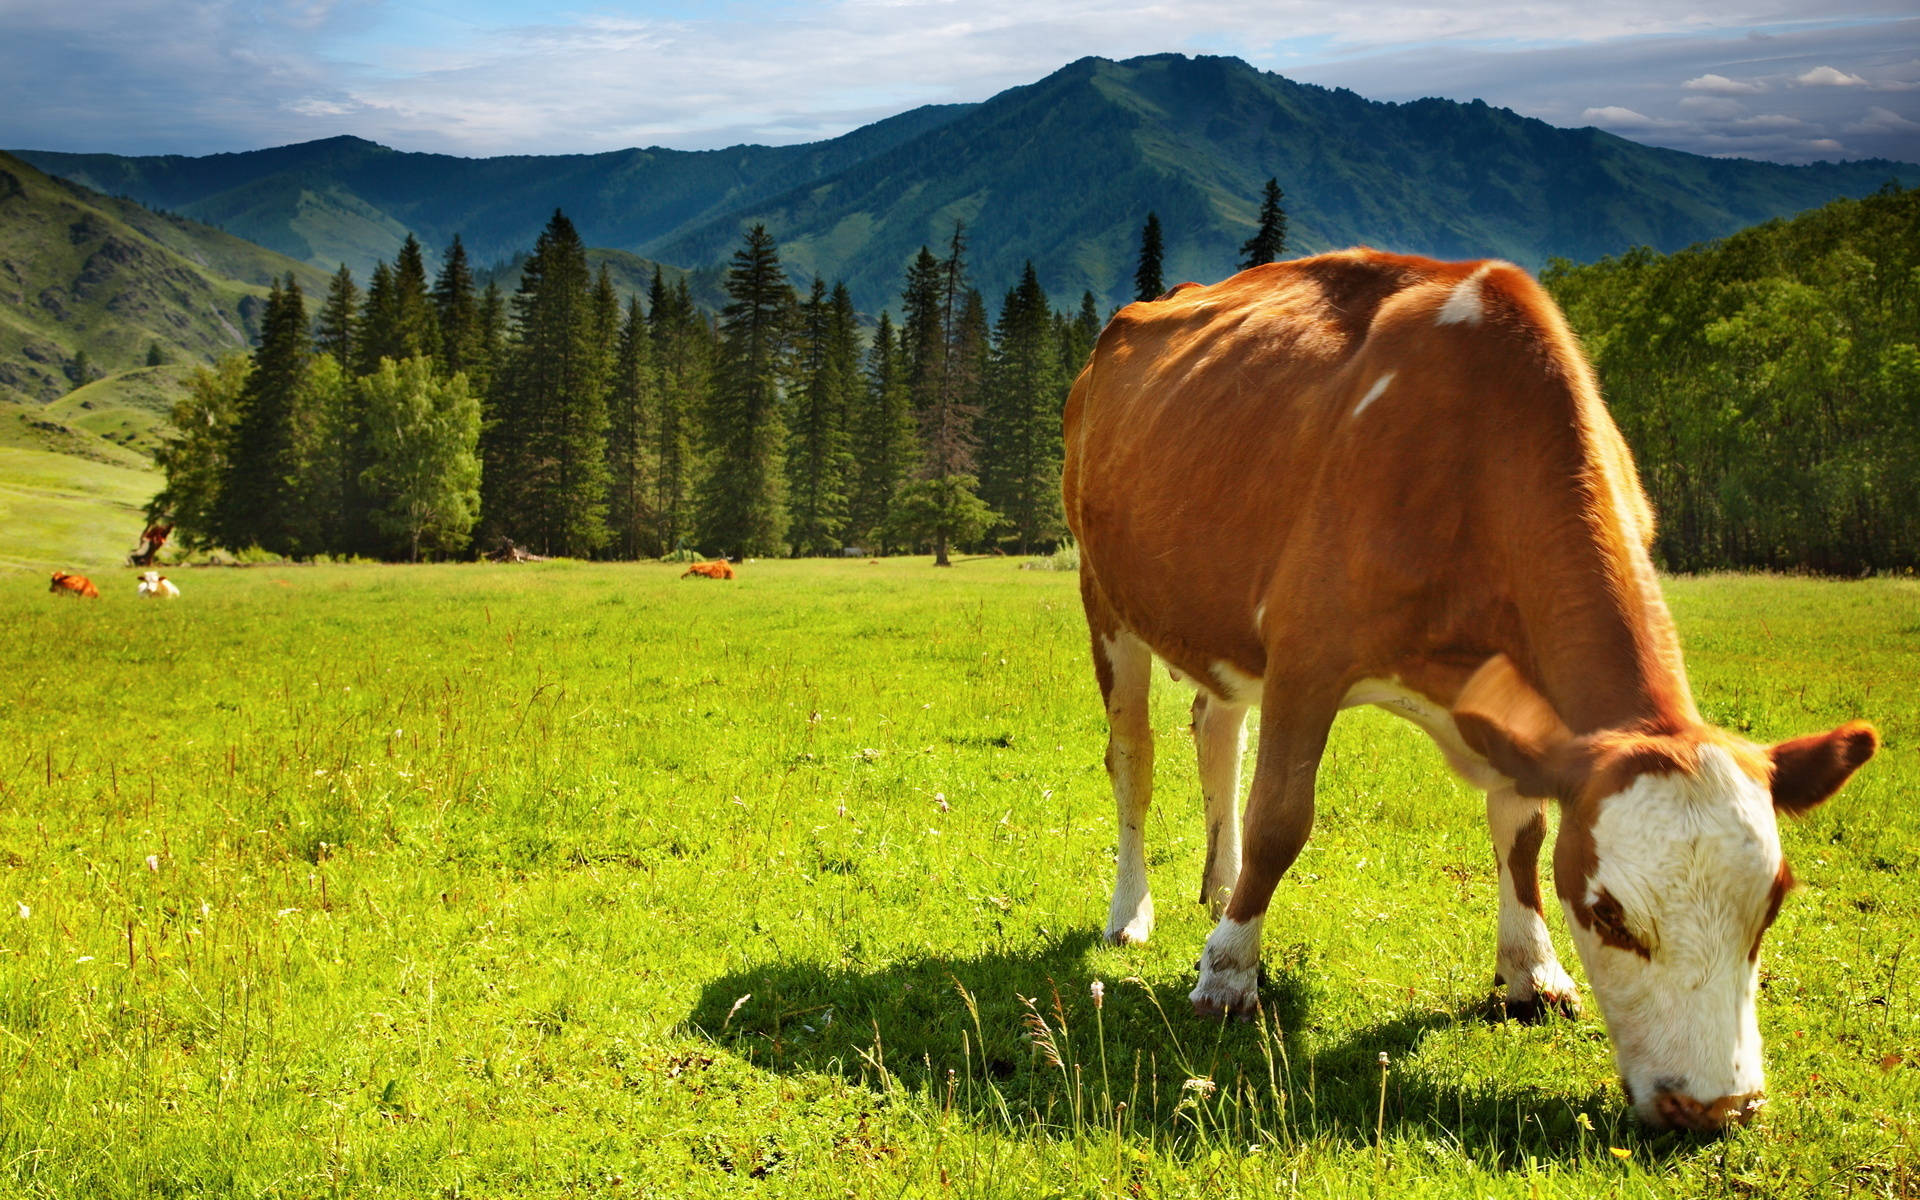 Cute Cow Eating Grass In Forest Background